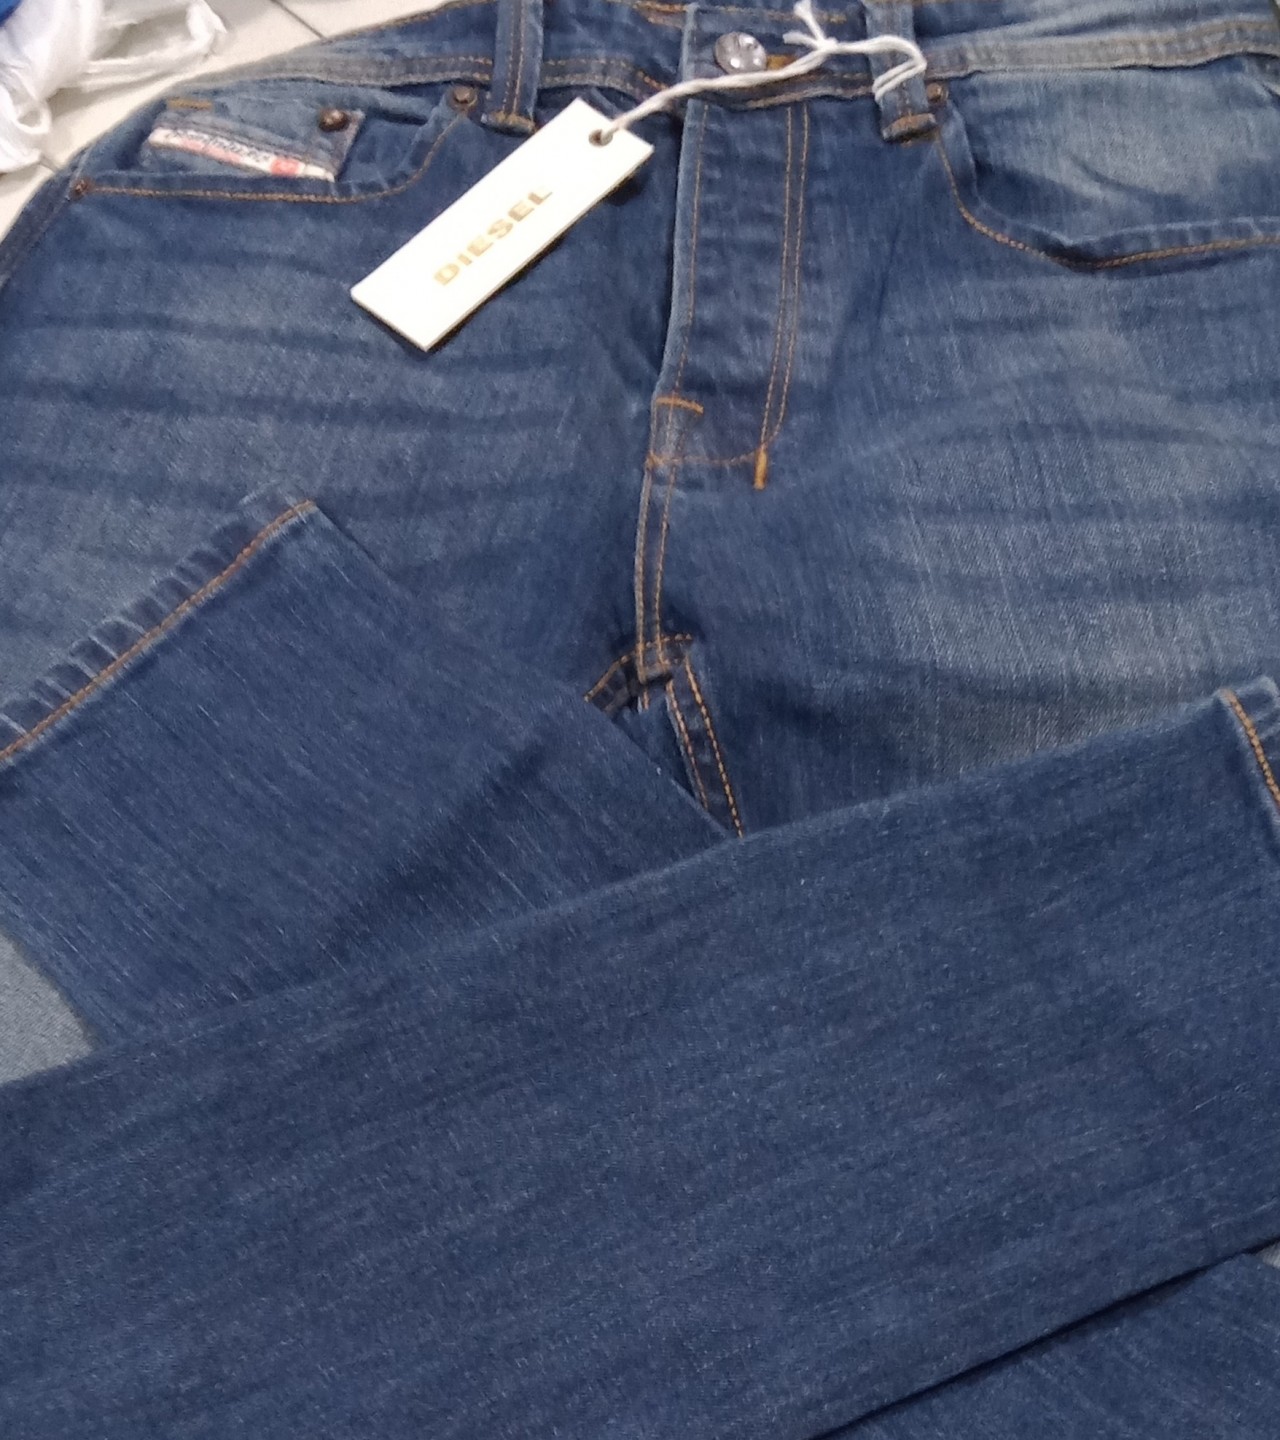 Orginal Diesel jeans made by Italy